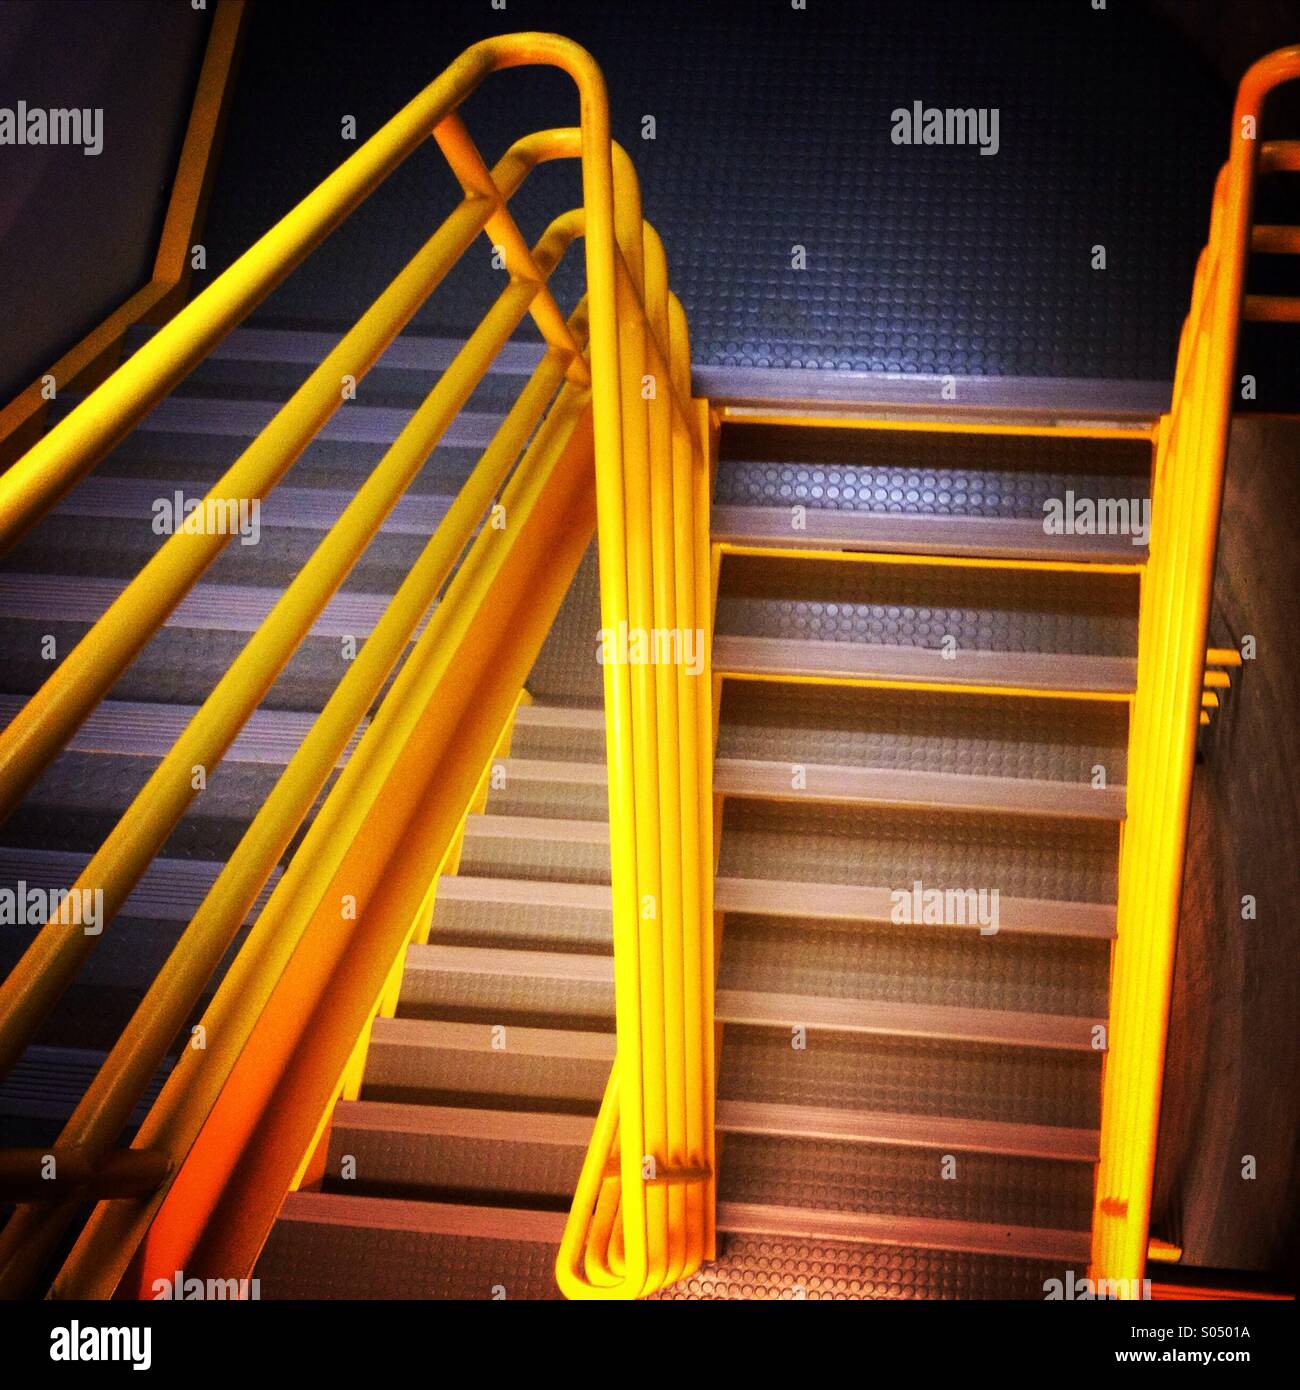 Industrial staircase in high tech office building. Going up, going down. Stock Photo